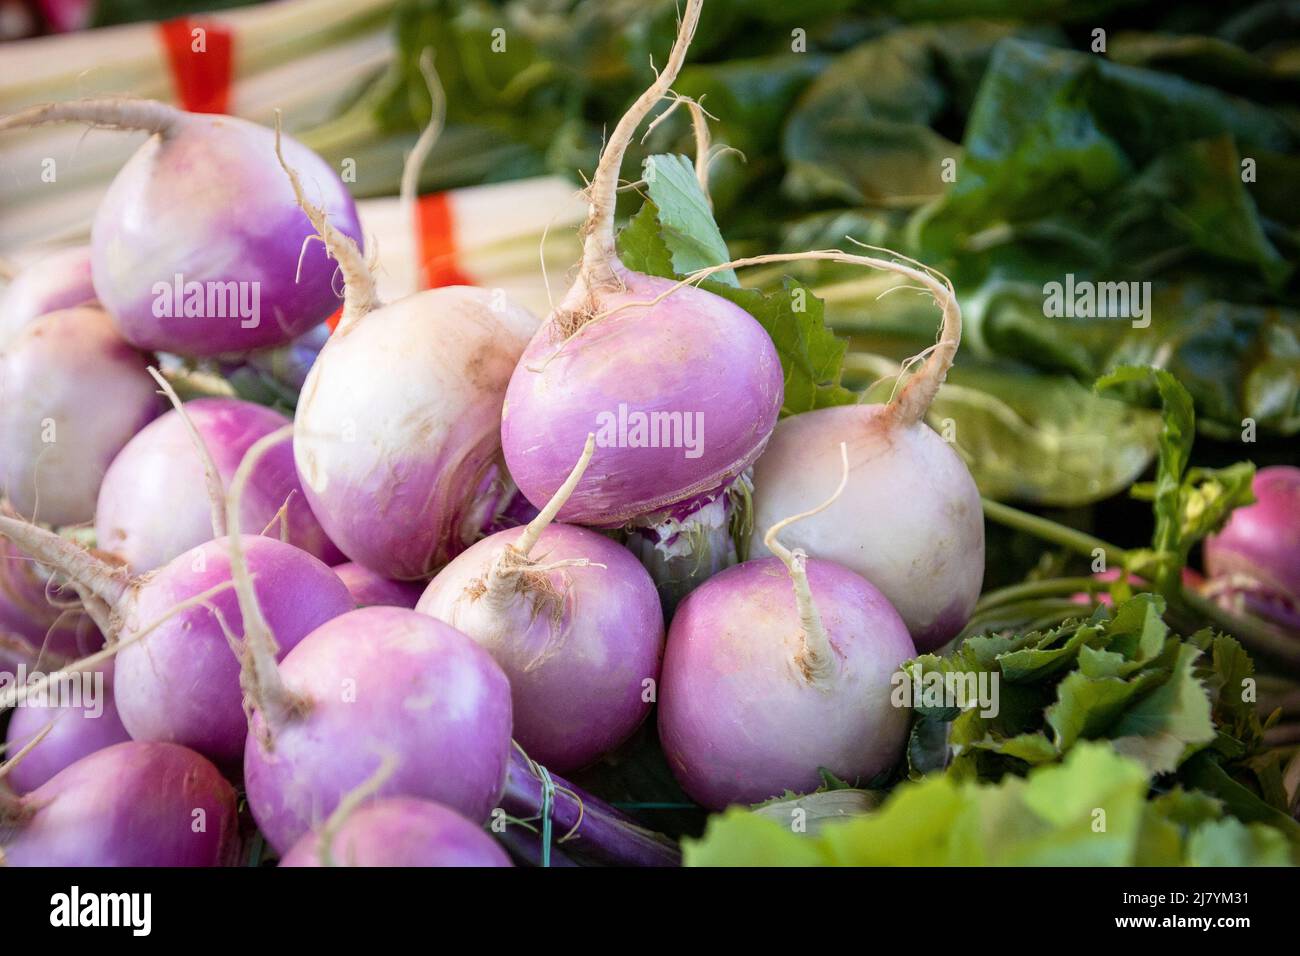 Close-up of turnip in a crate Stock Photo